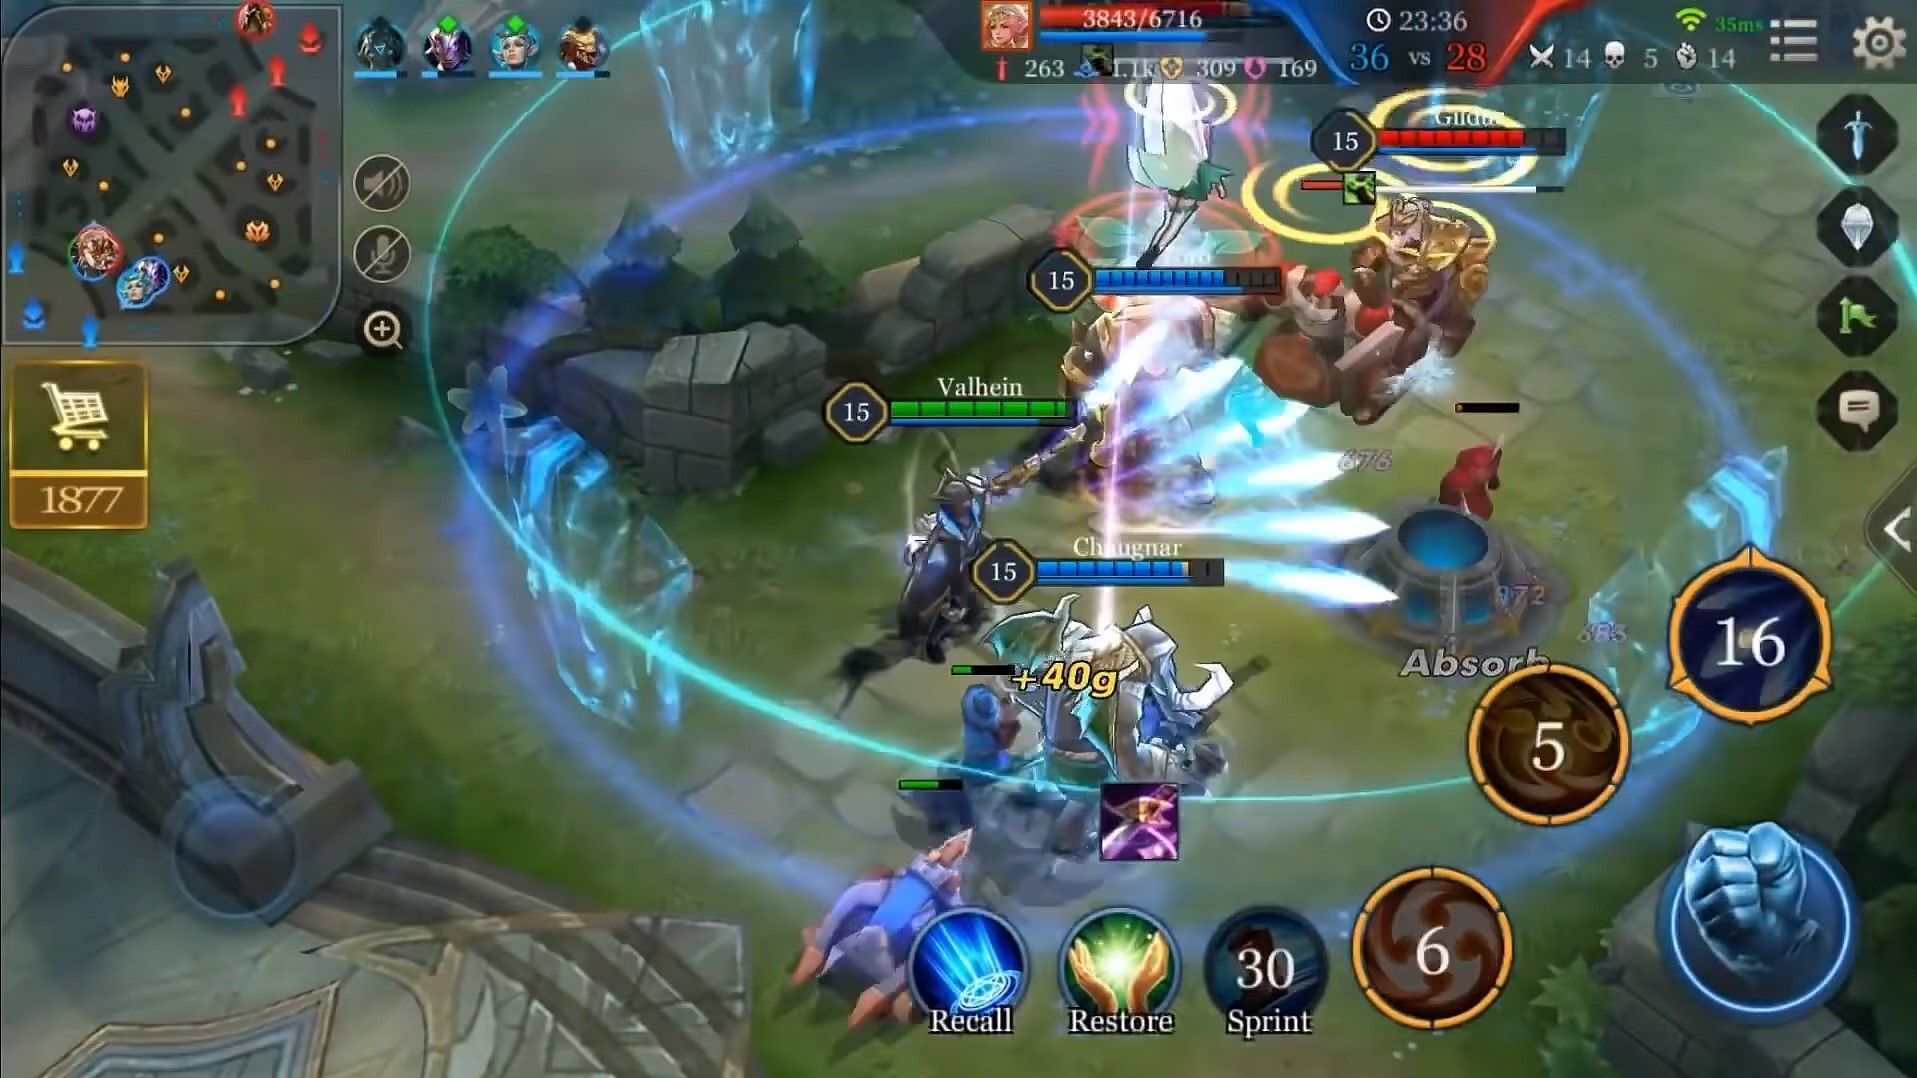 Here's why Tencent is planning to make the LoL mobile game